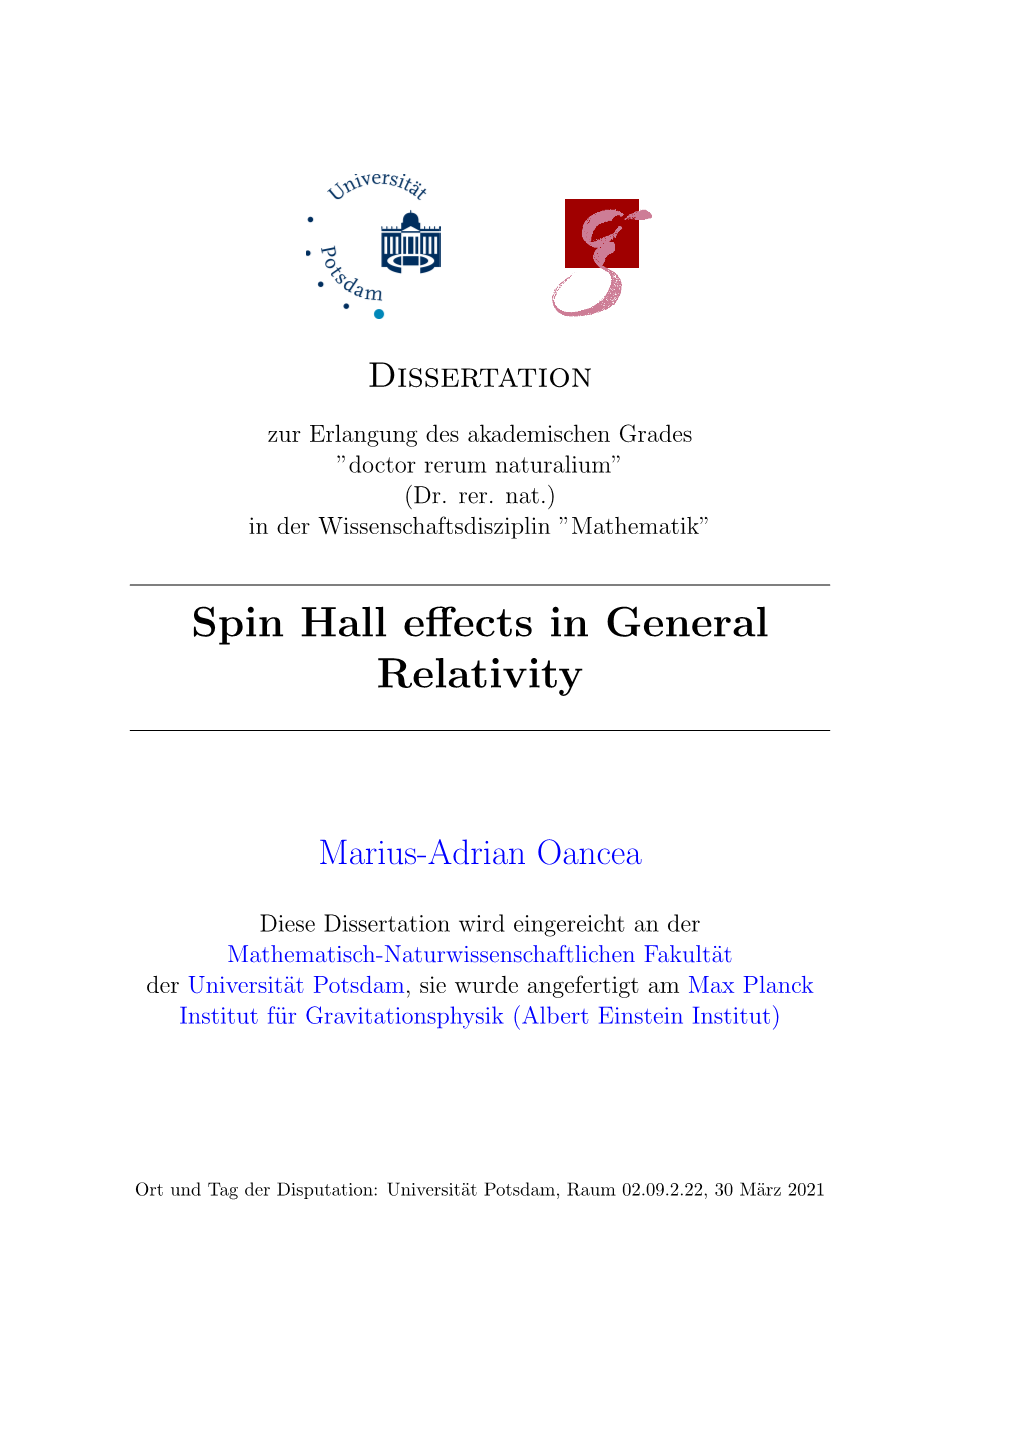 Spin Hall Effects in General Relativity